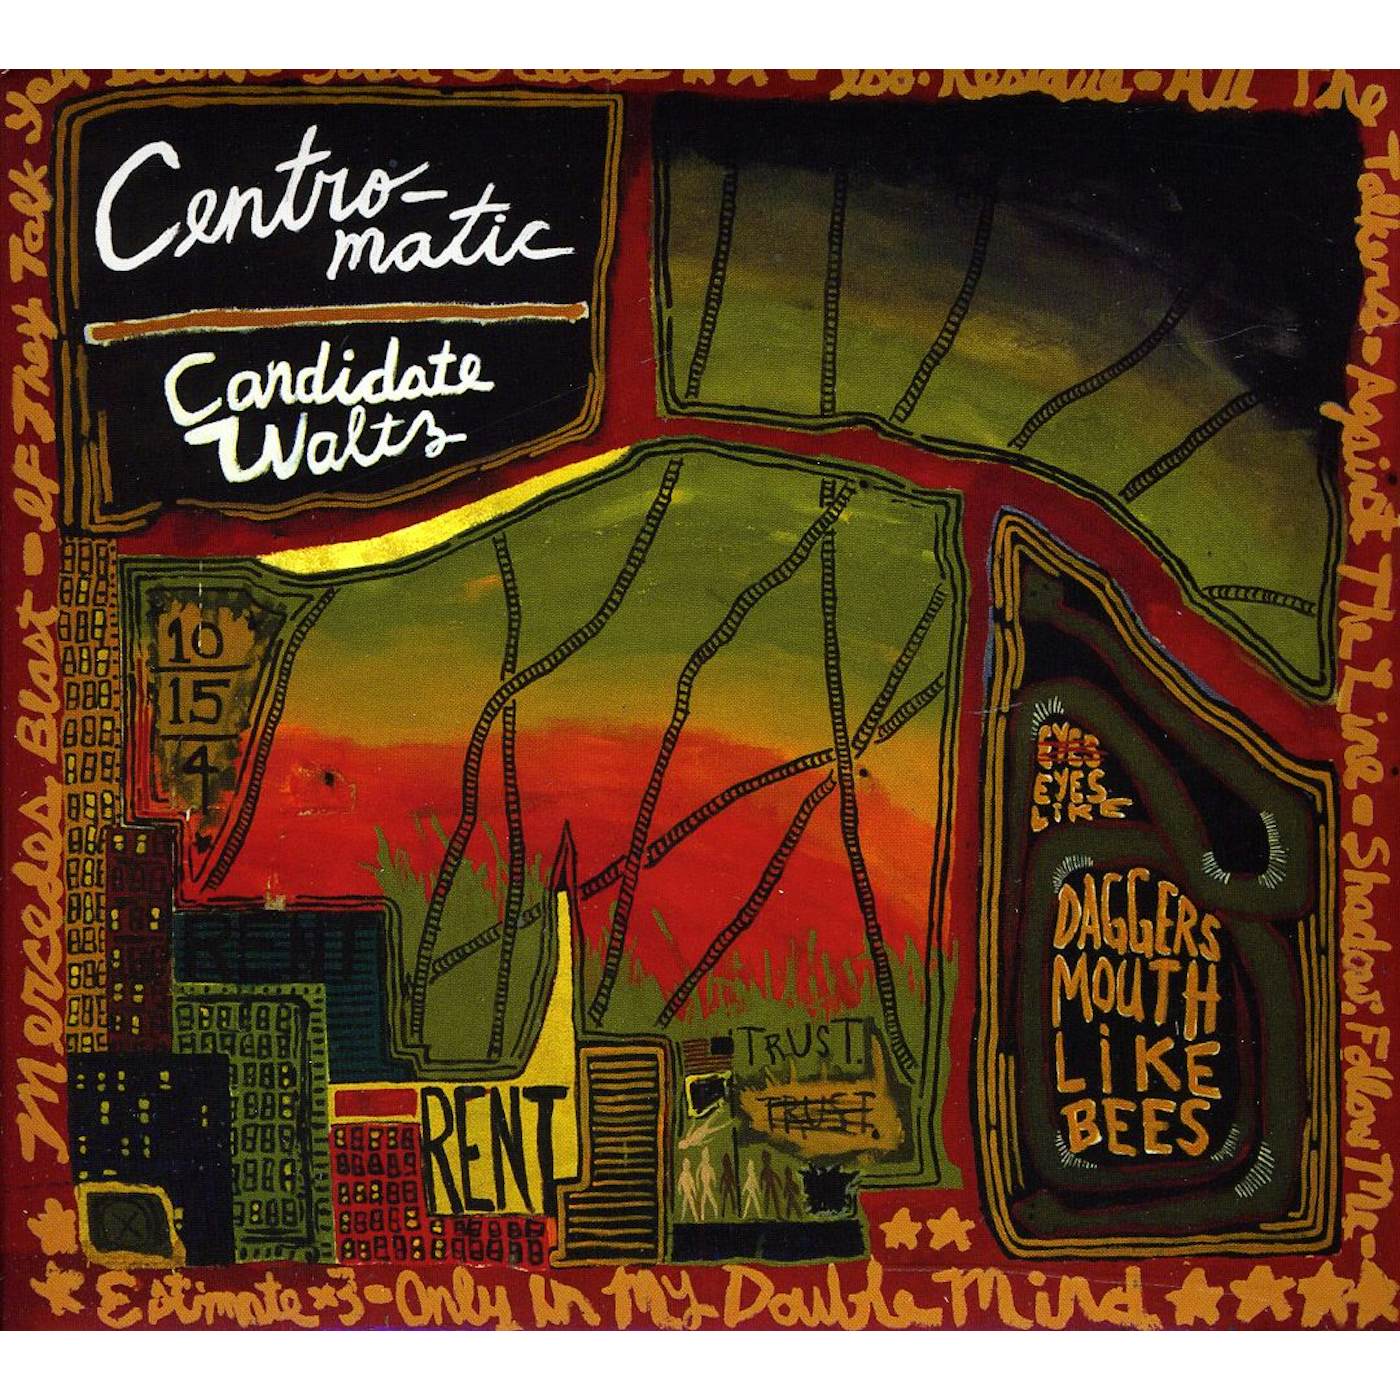 Centro-matic CANDIDATE WALTZ CD